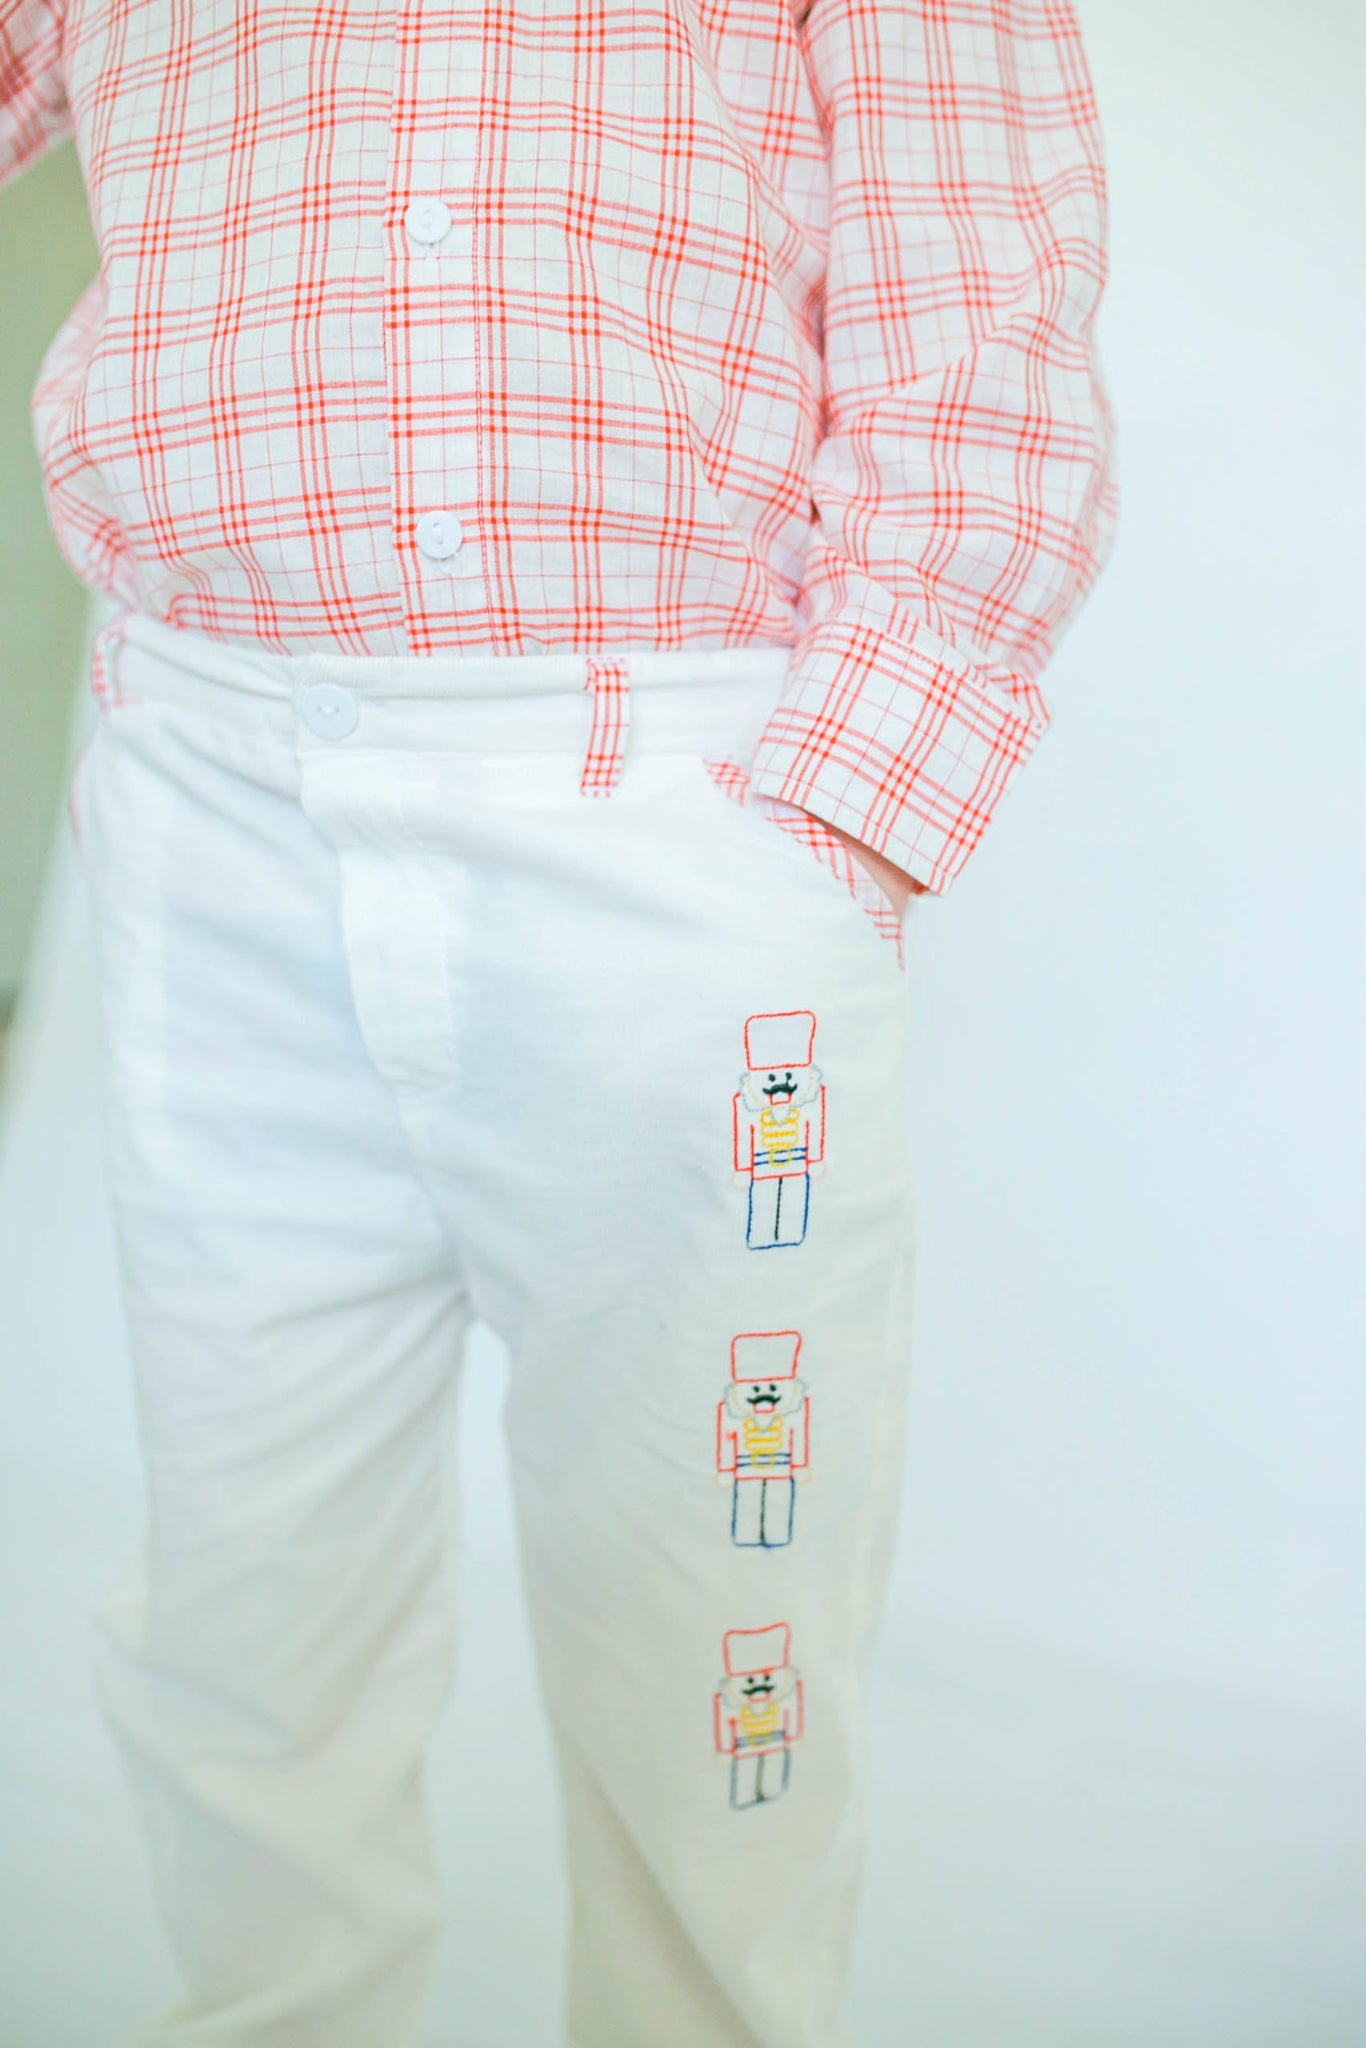 Corduroy Shadow Embroidery Toy Soldier Pant Set